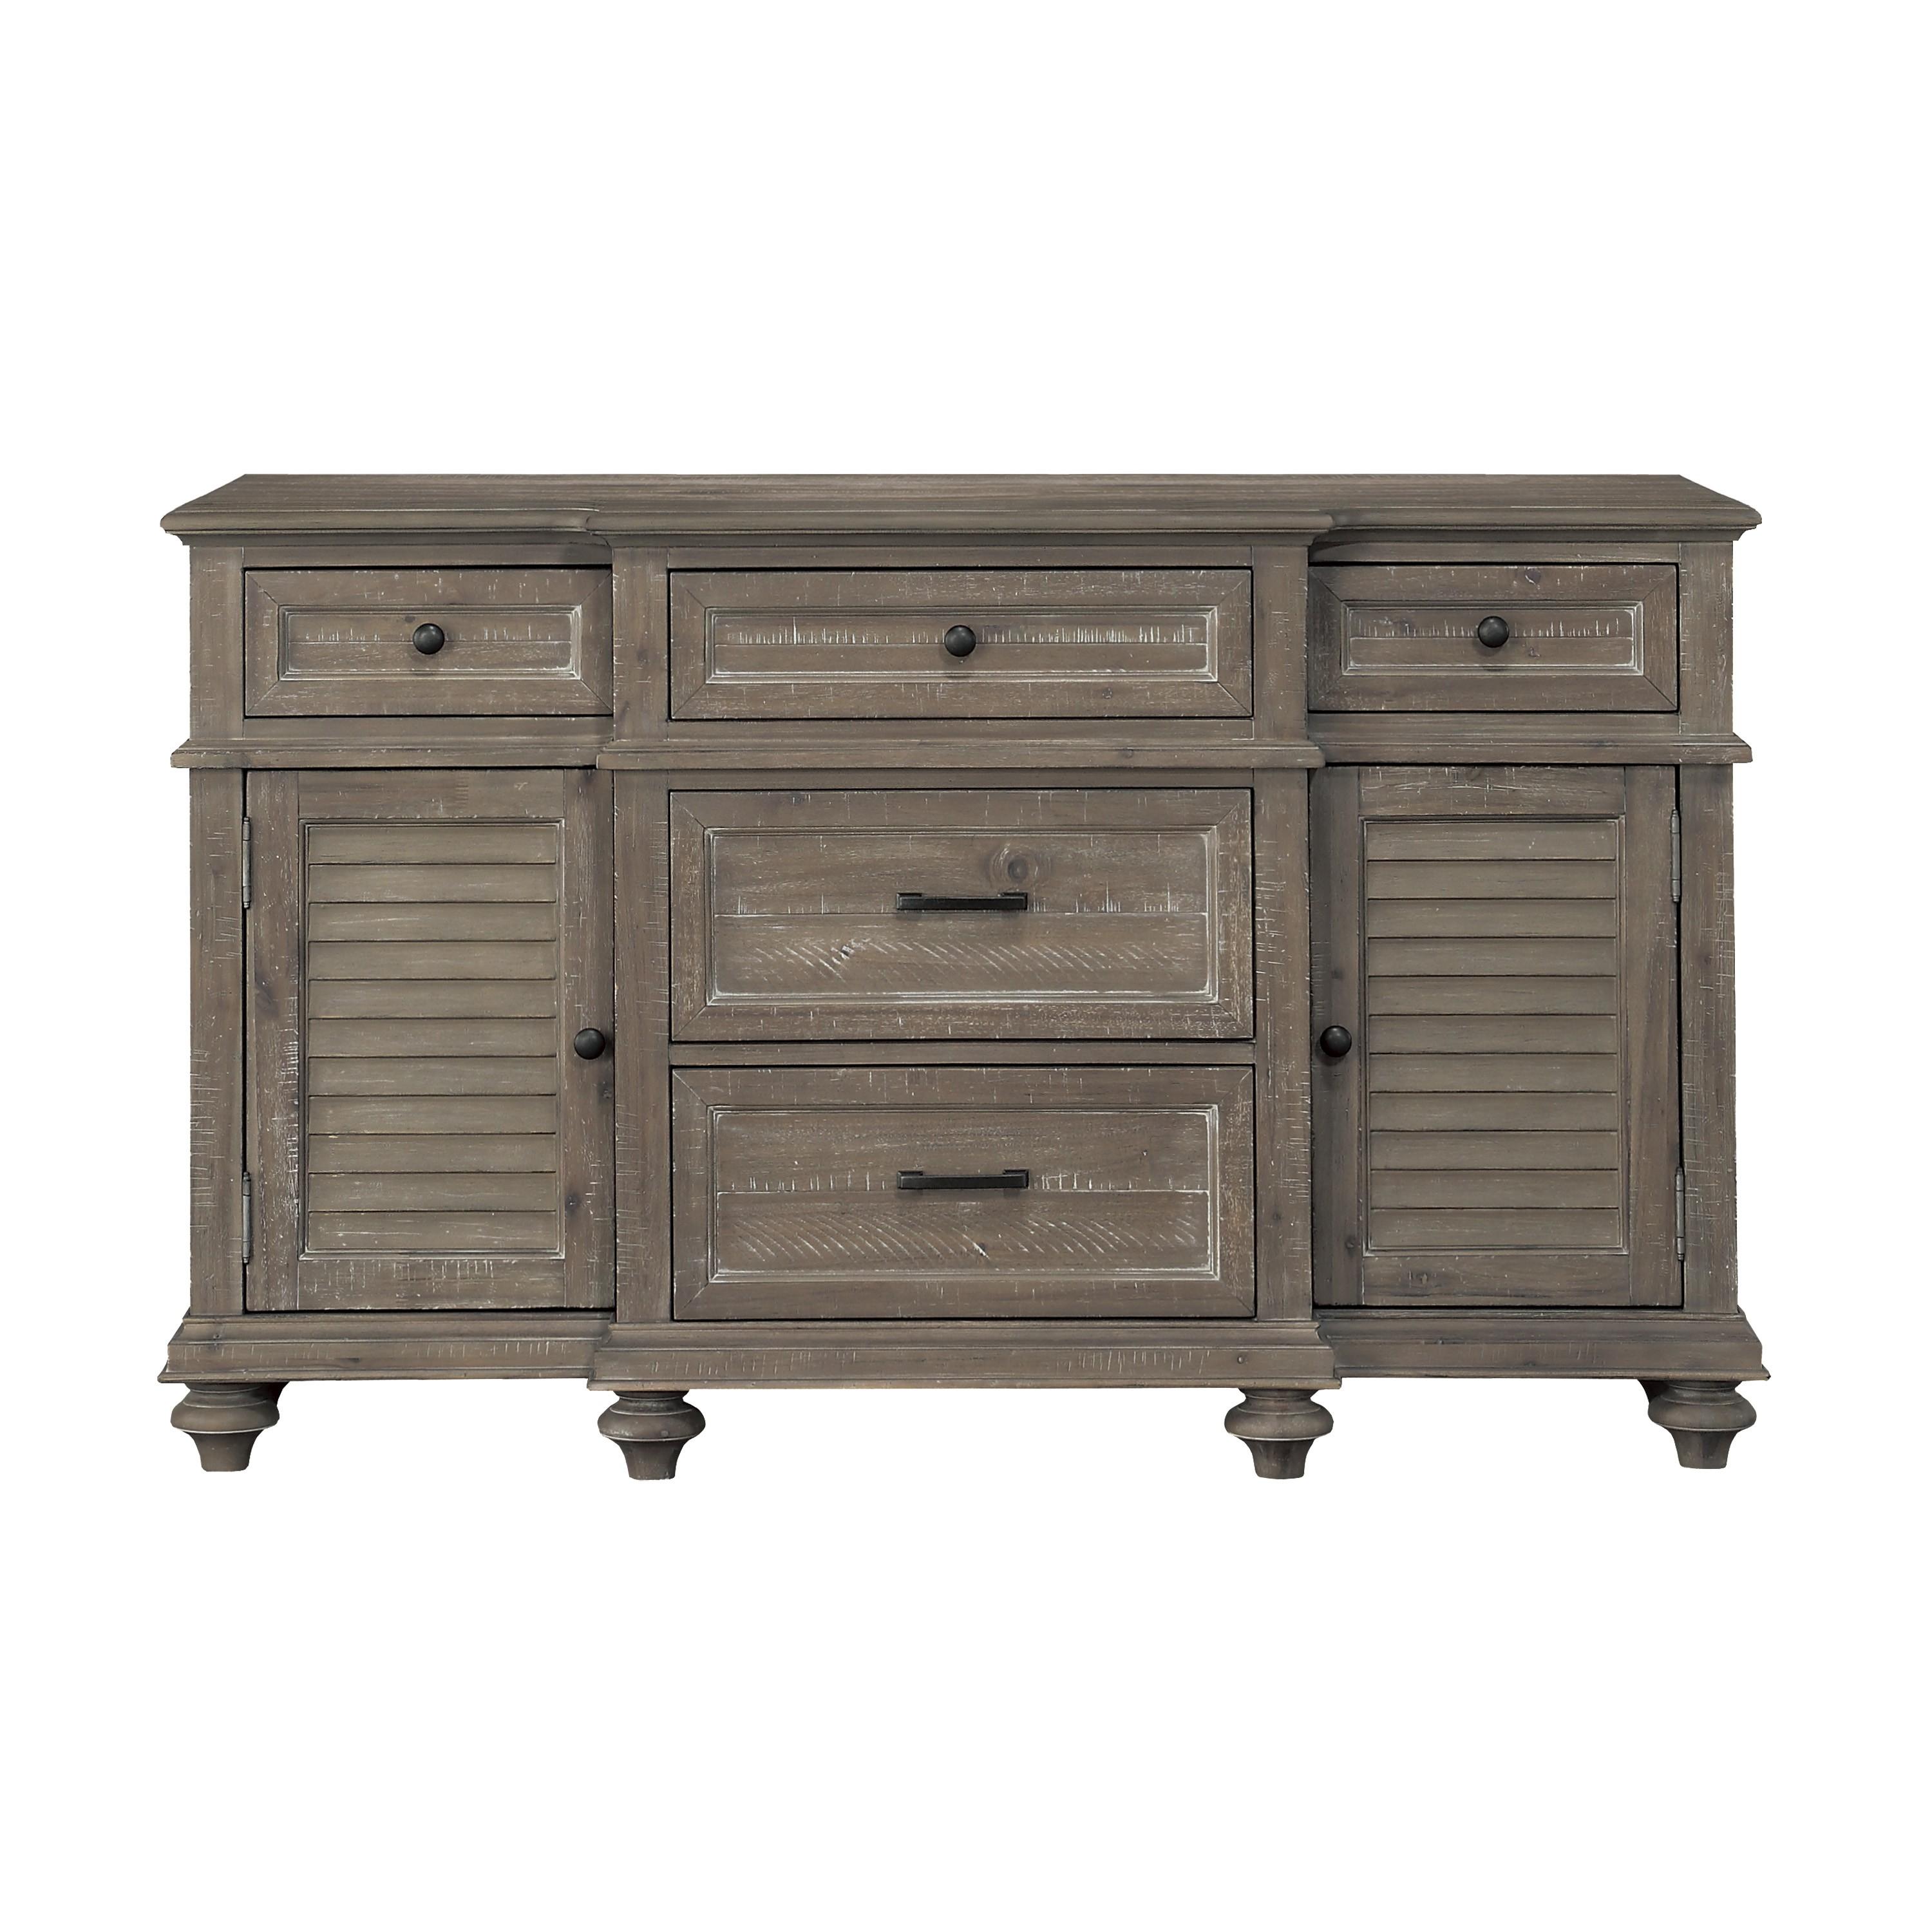 Transitional Buffet Cardano Collection Buffet 5848-40-S 1689BR-55-B in Light Brown 